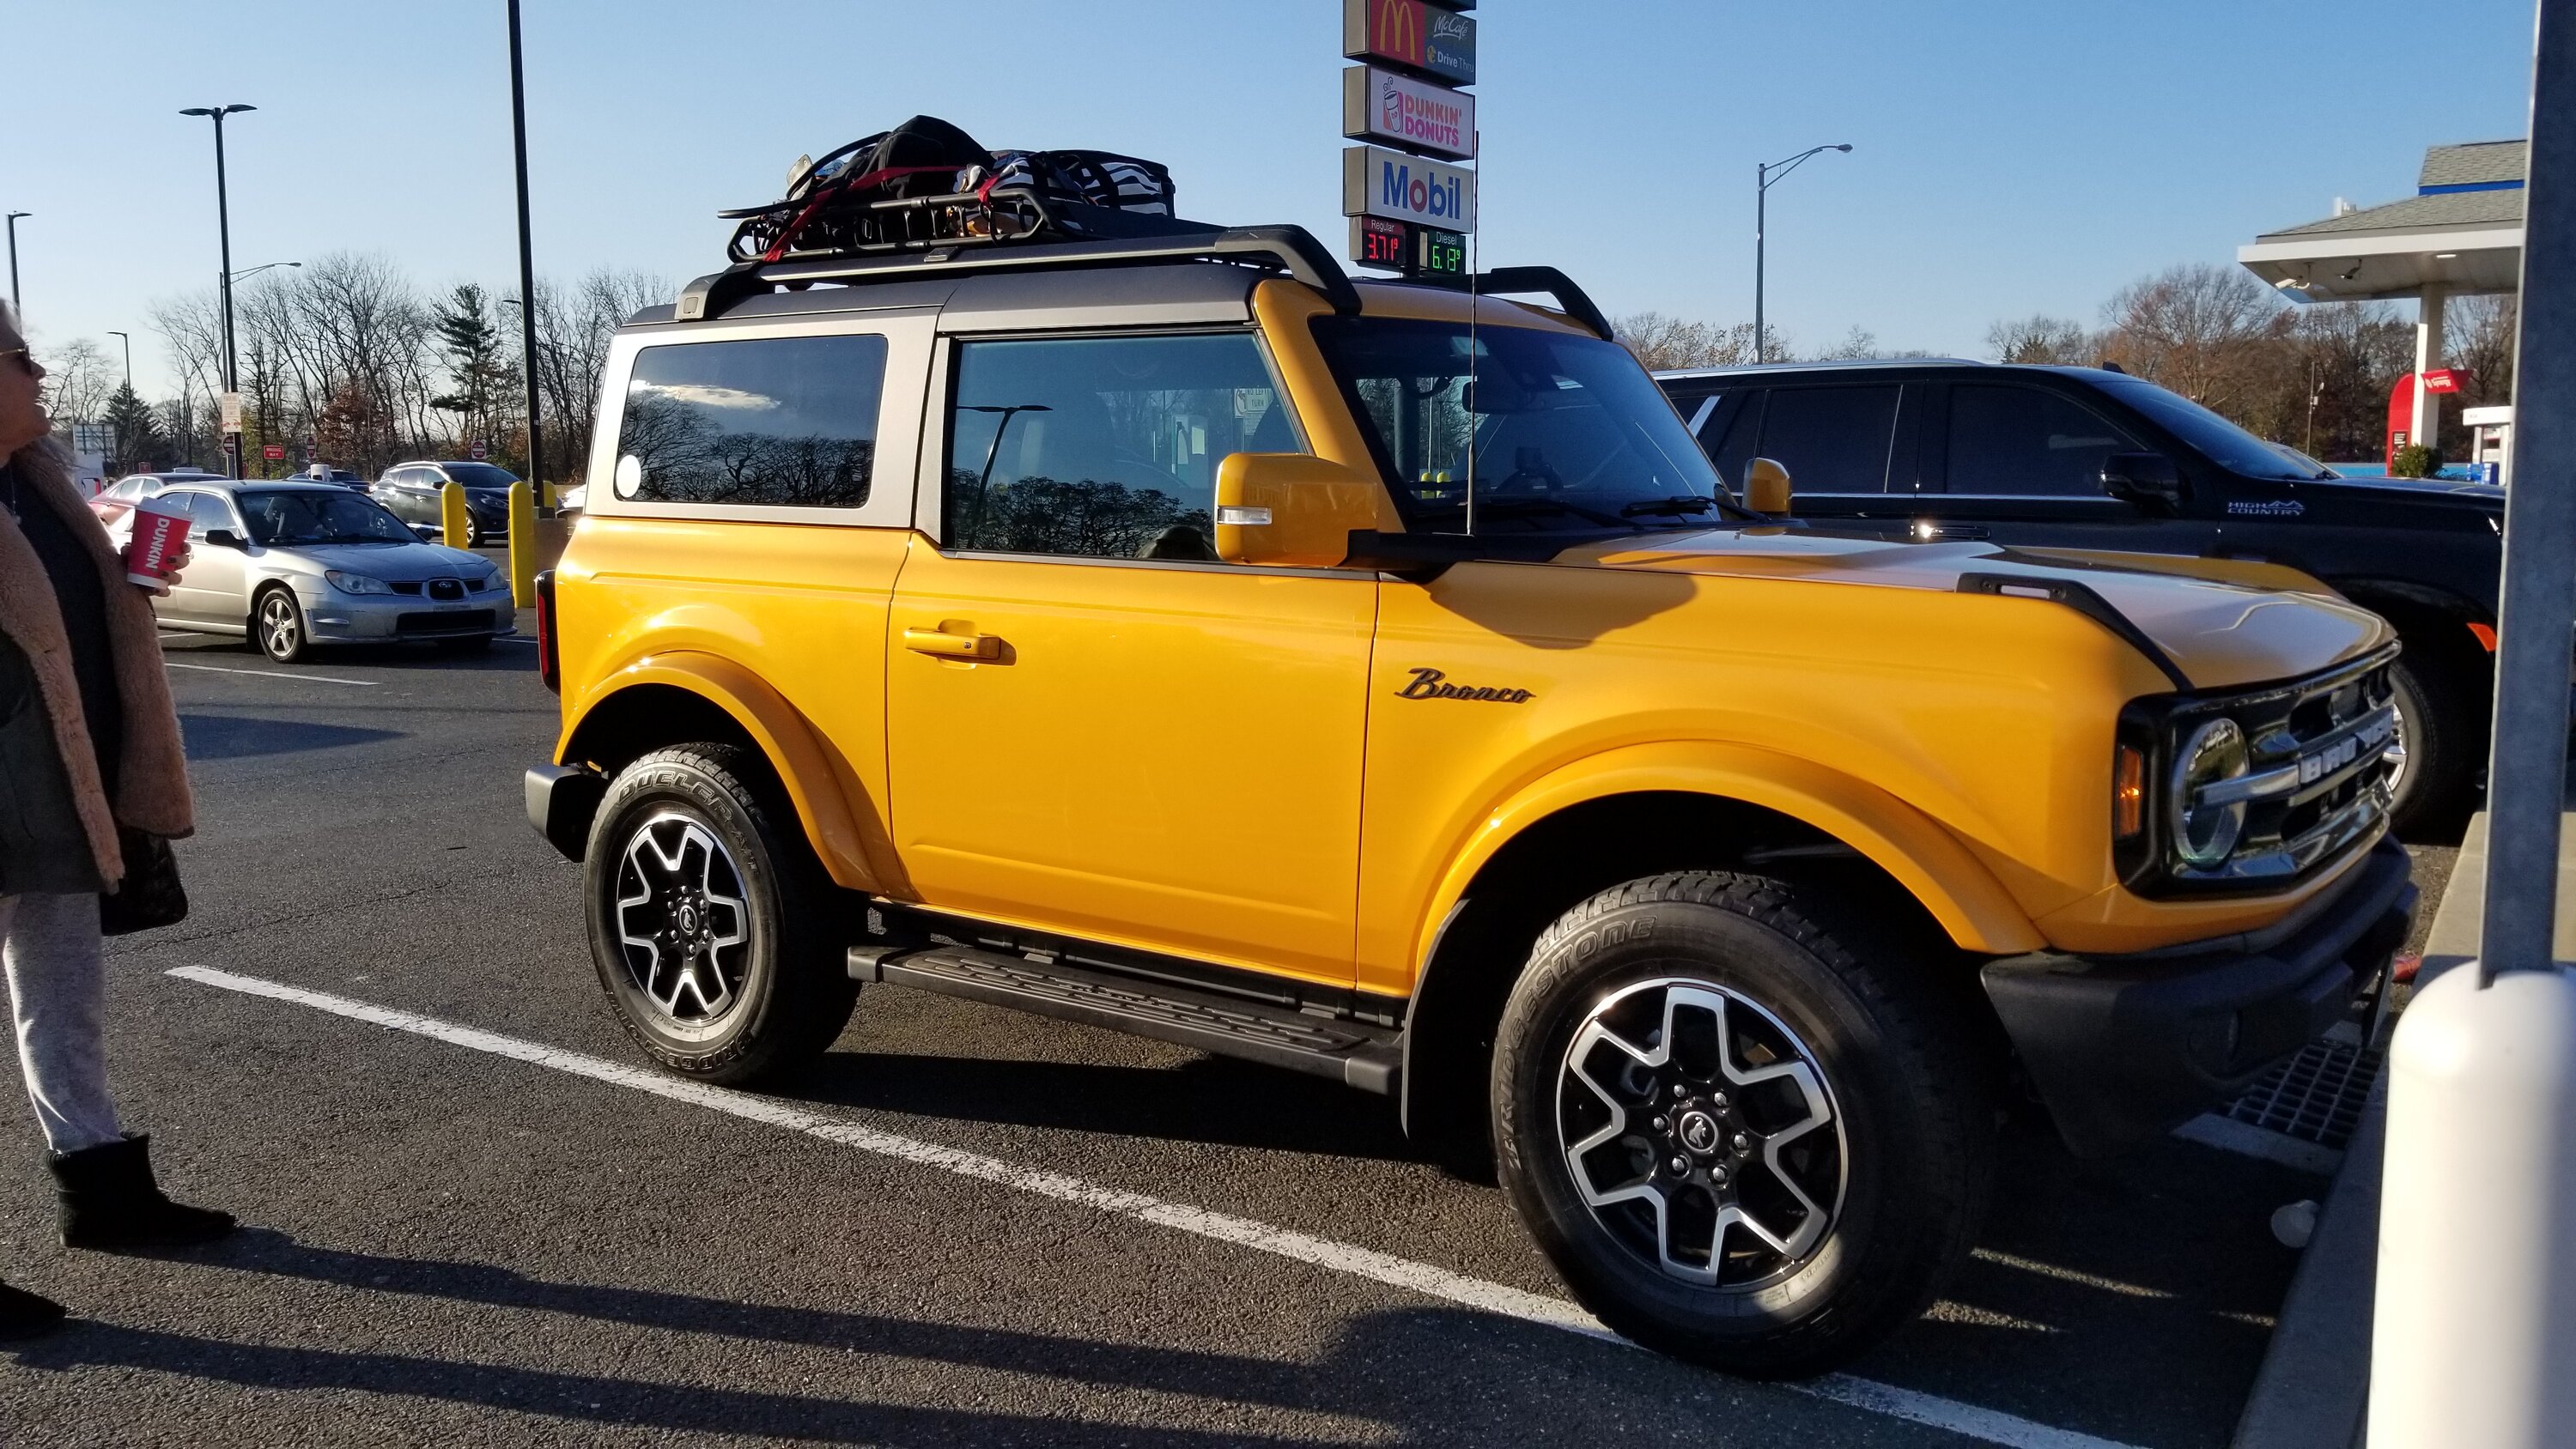 Ford Bronco 2 Door Broncos - What’s on your roof racks? [Photos Thread] 20221119_145050